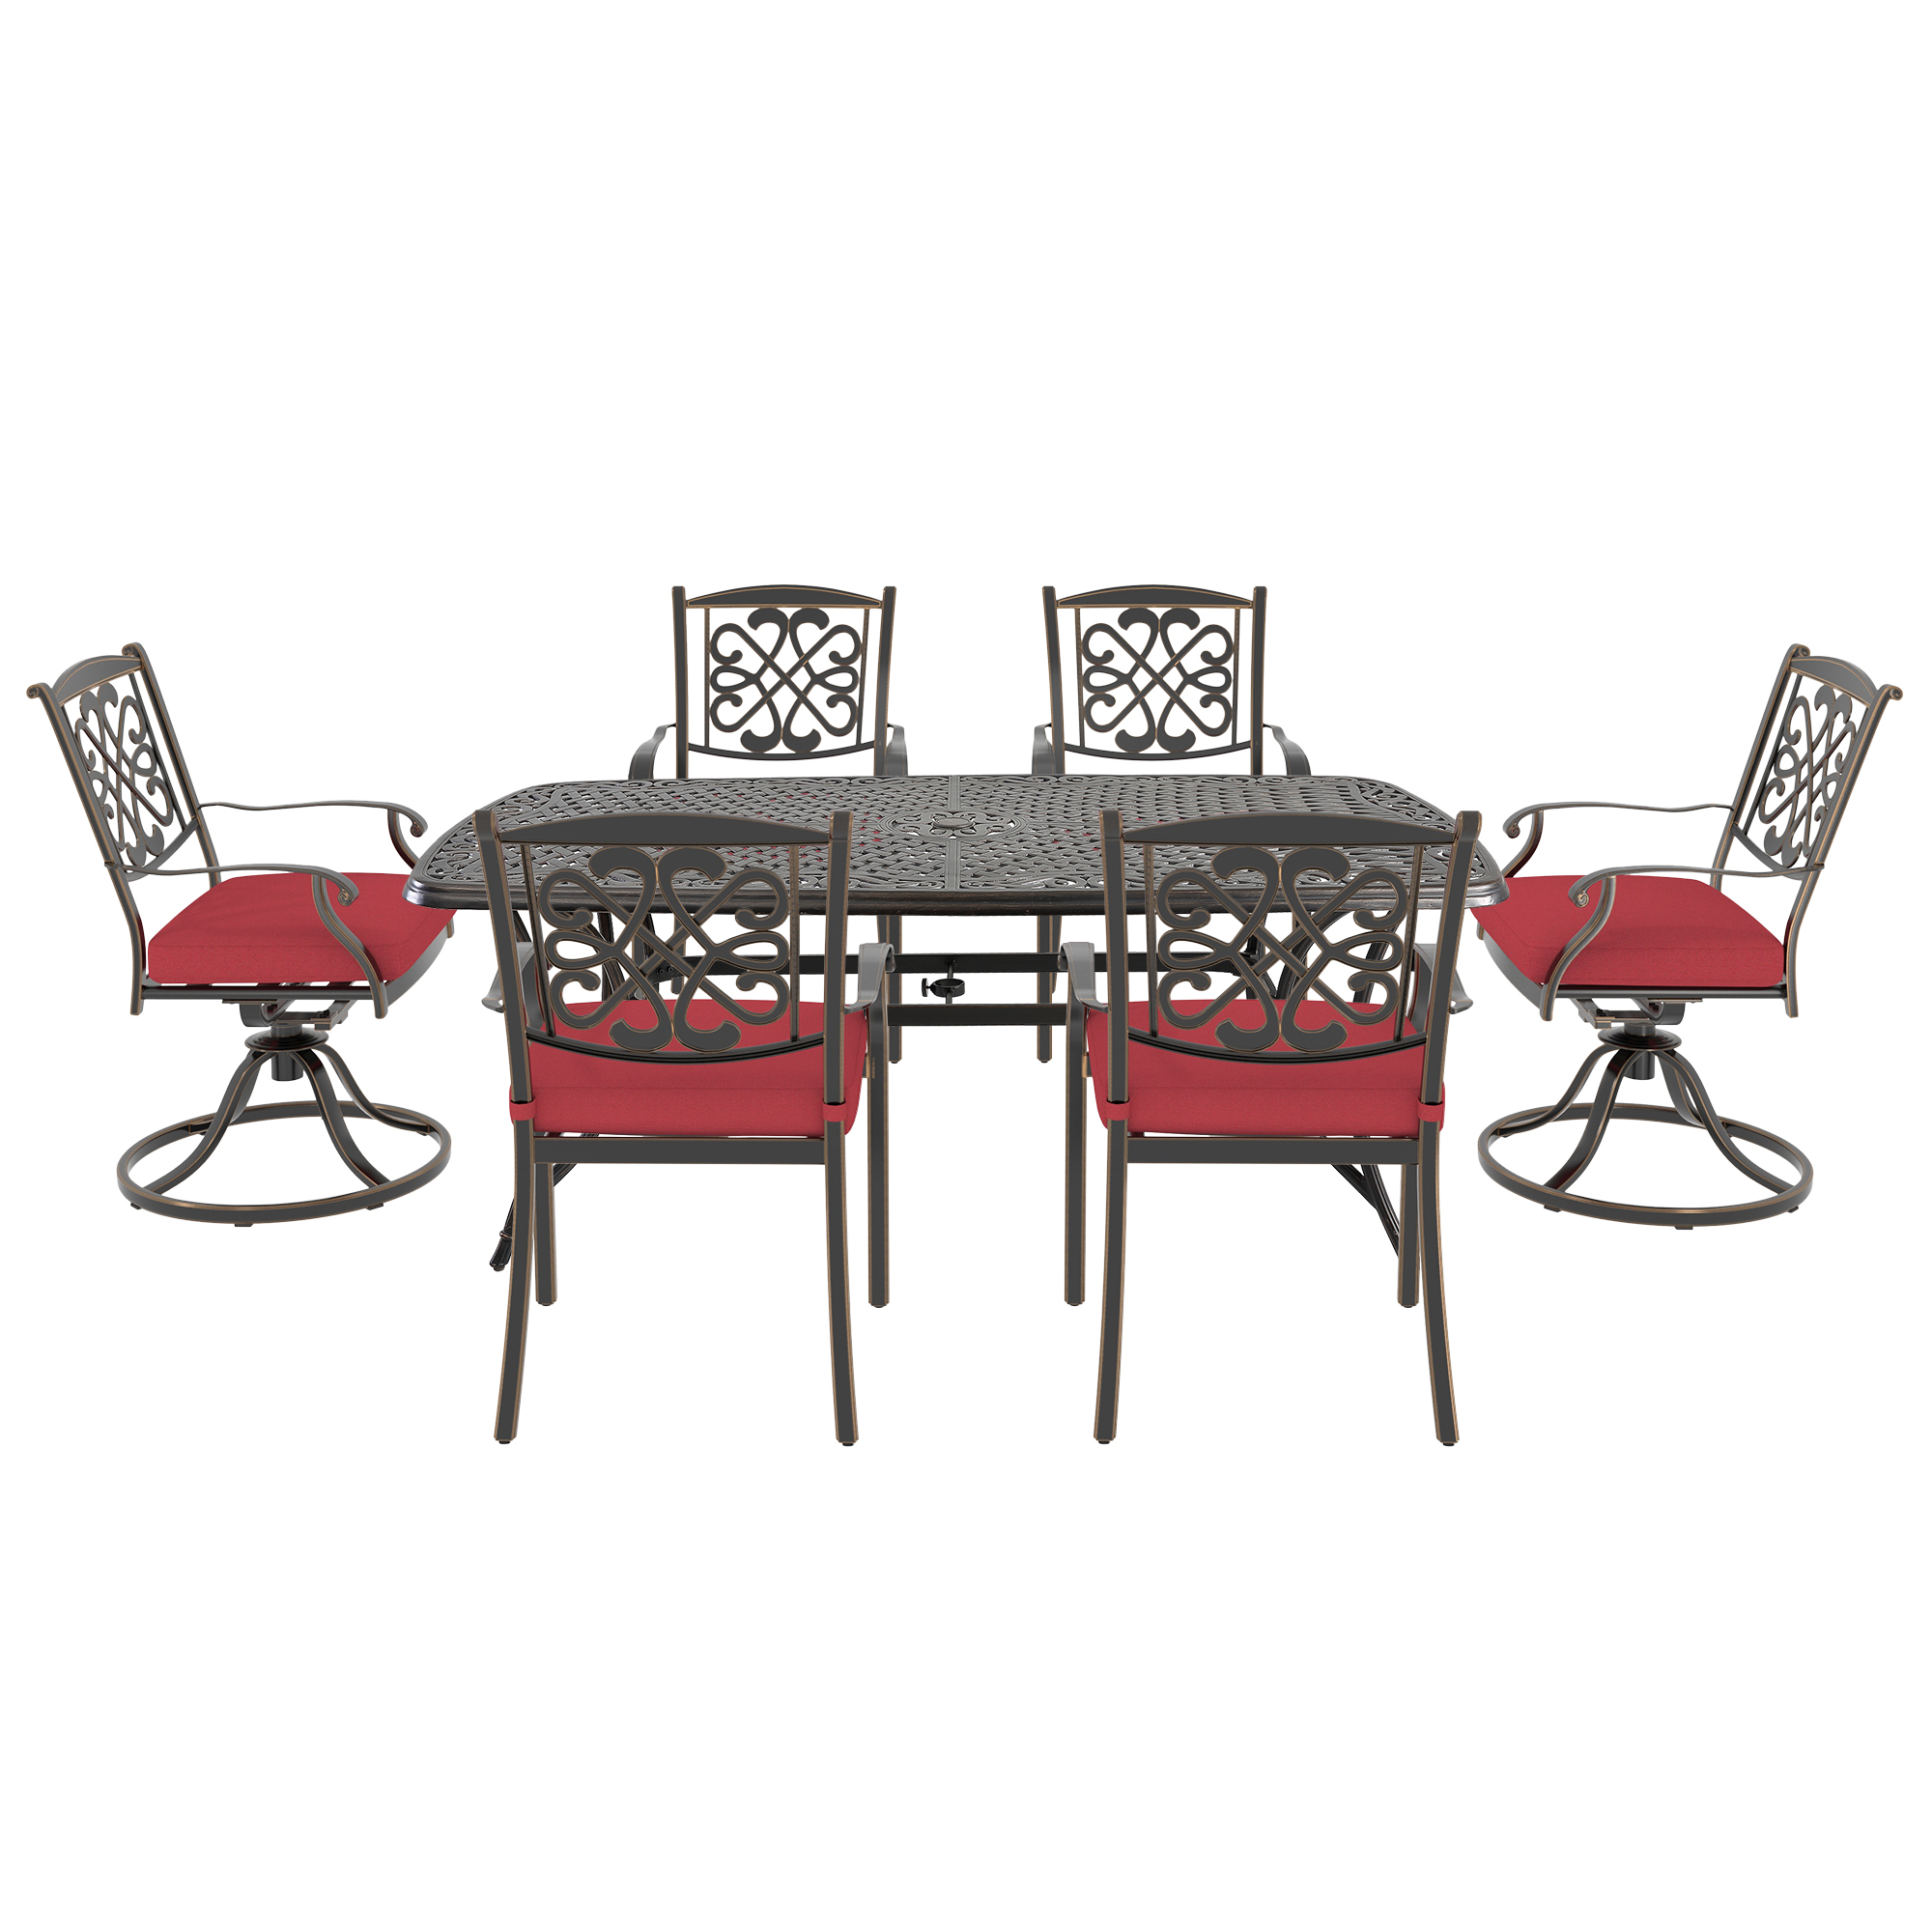 Mondawe 7Pcs Cast Aluminum Dining Set with Table, Flower-Shaped Backrest Swivel Chairs and Flower-Shaped Backrest Dining Chairs In Red/Beige-Mondawe